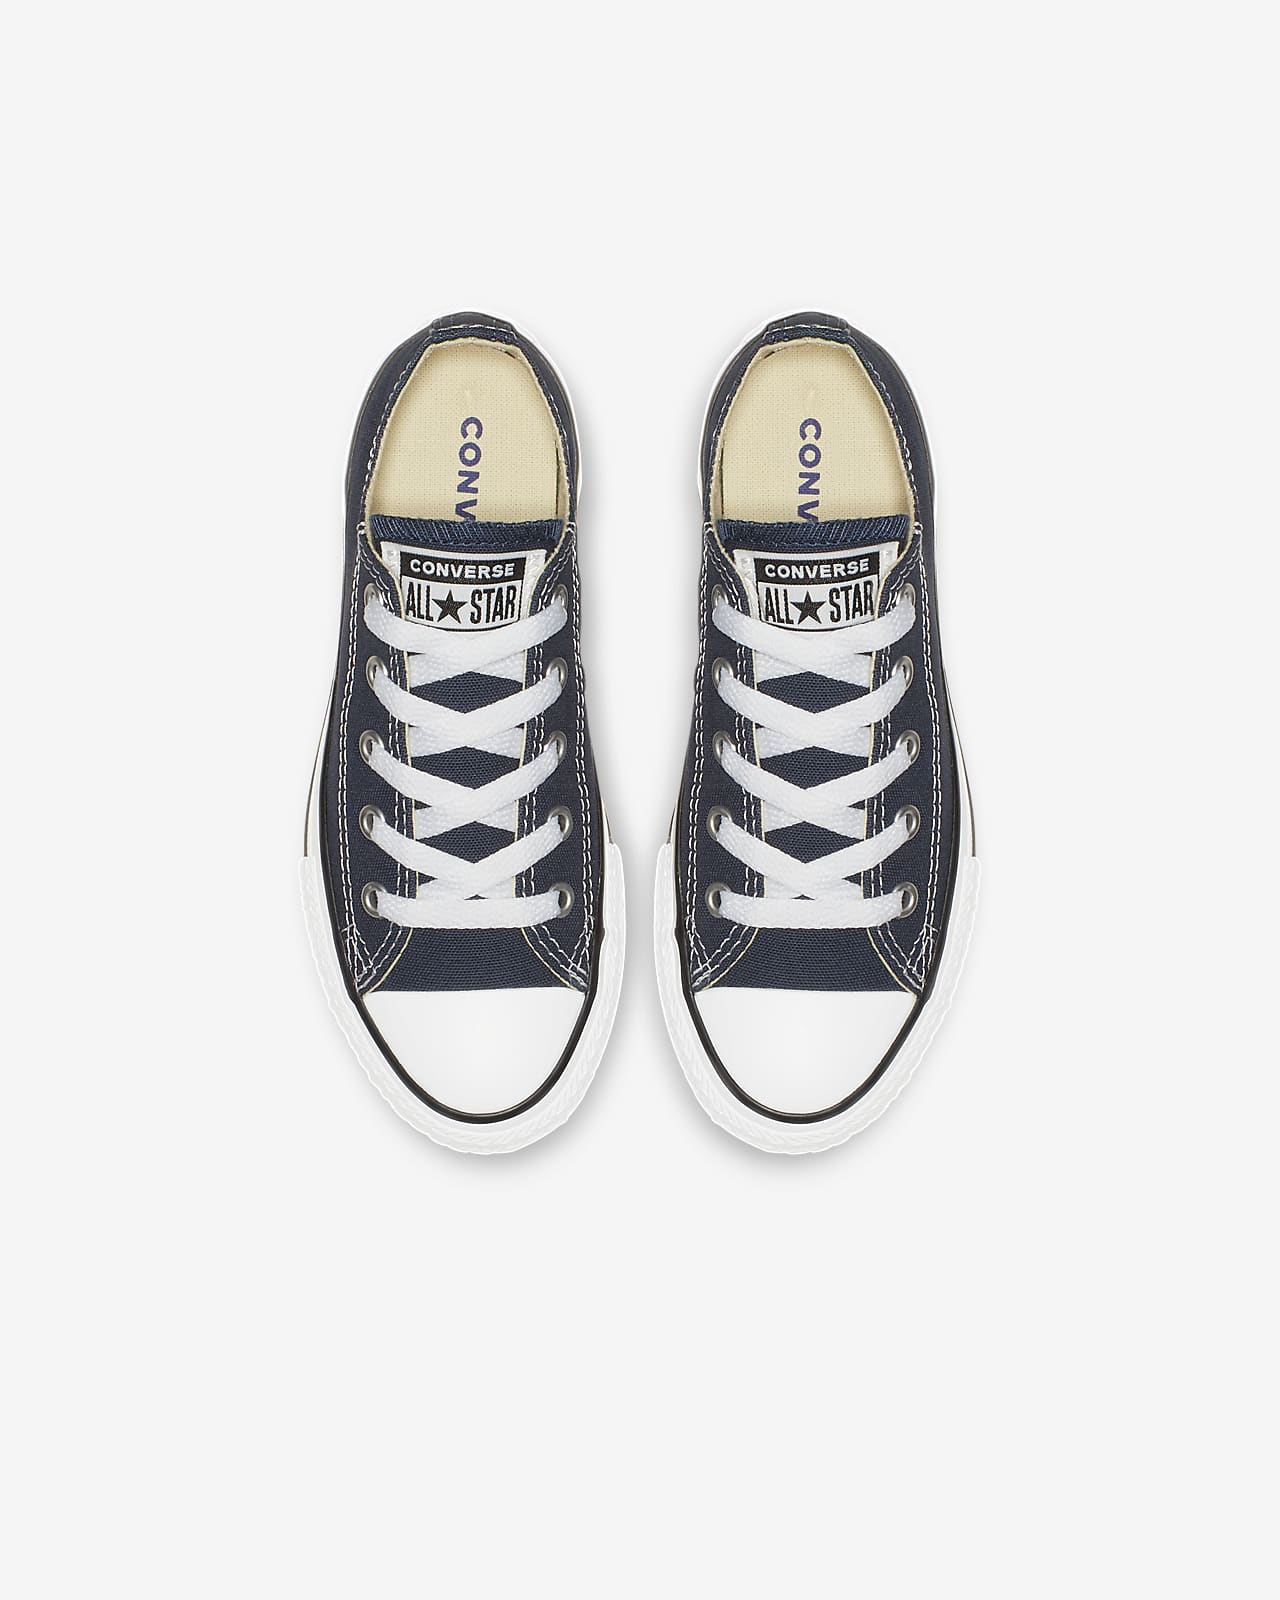 converse baby shoes online malaysia